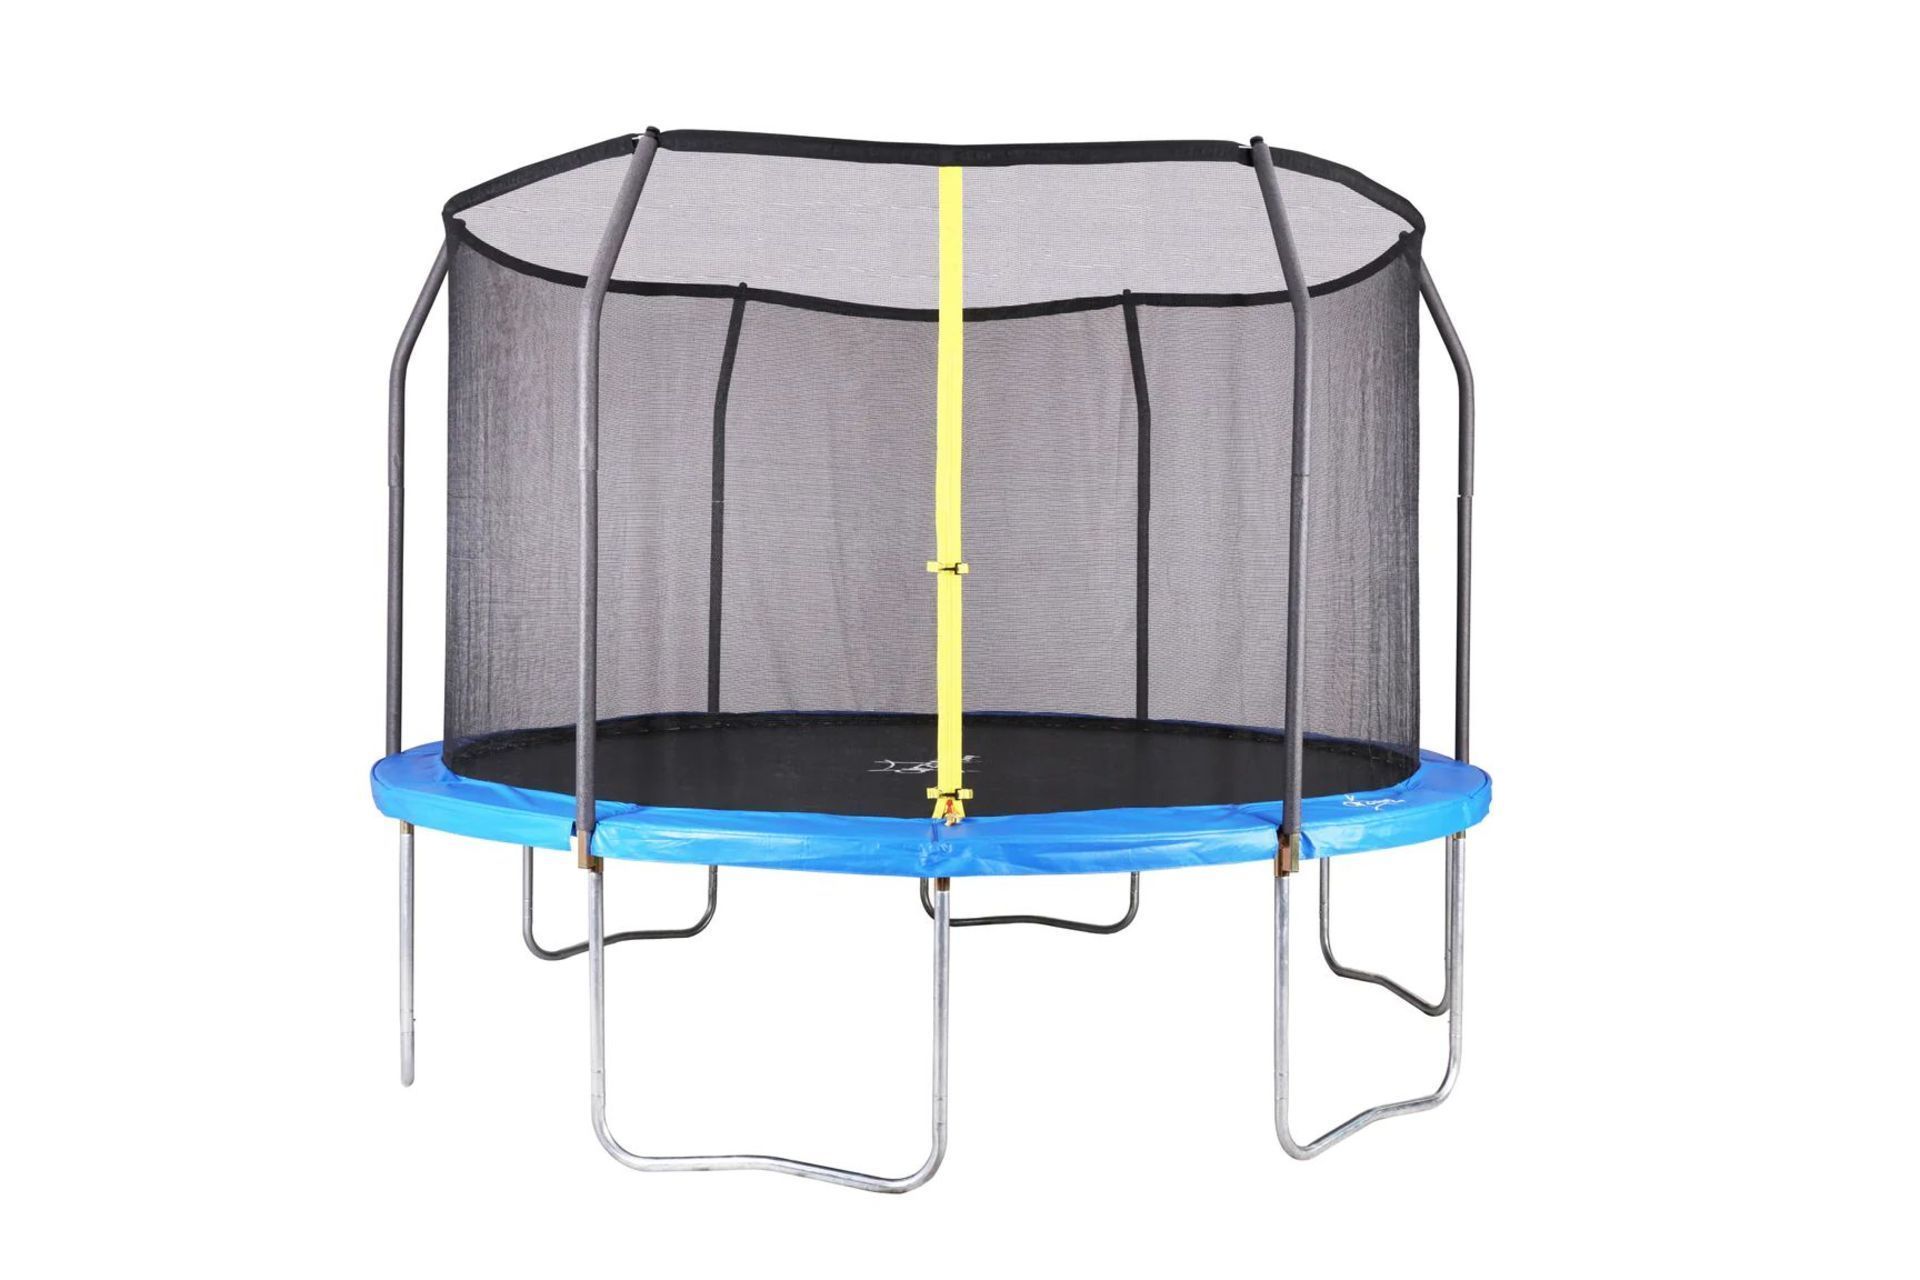 New & Boxed Airzone 14 Foot Trampoline with Enclosure. The AirZone Jump 14 Backyard Trampoline is